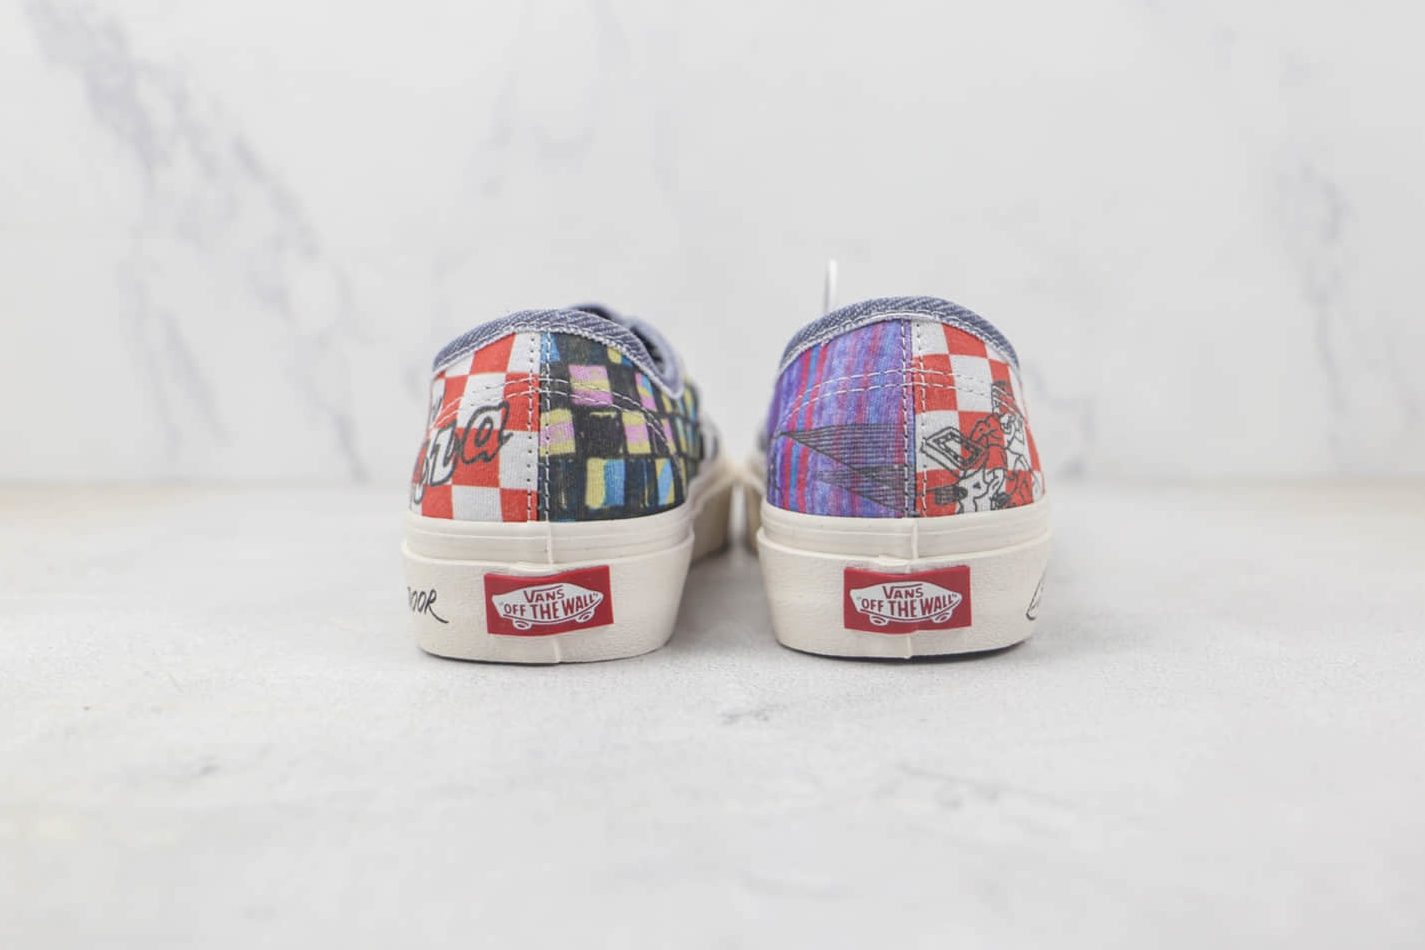 Vans Stranger Things x Authentic 'Surfer Boy Pizza' VN0A5JMPBO5 - Limited Edition Collaboration